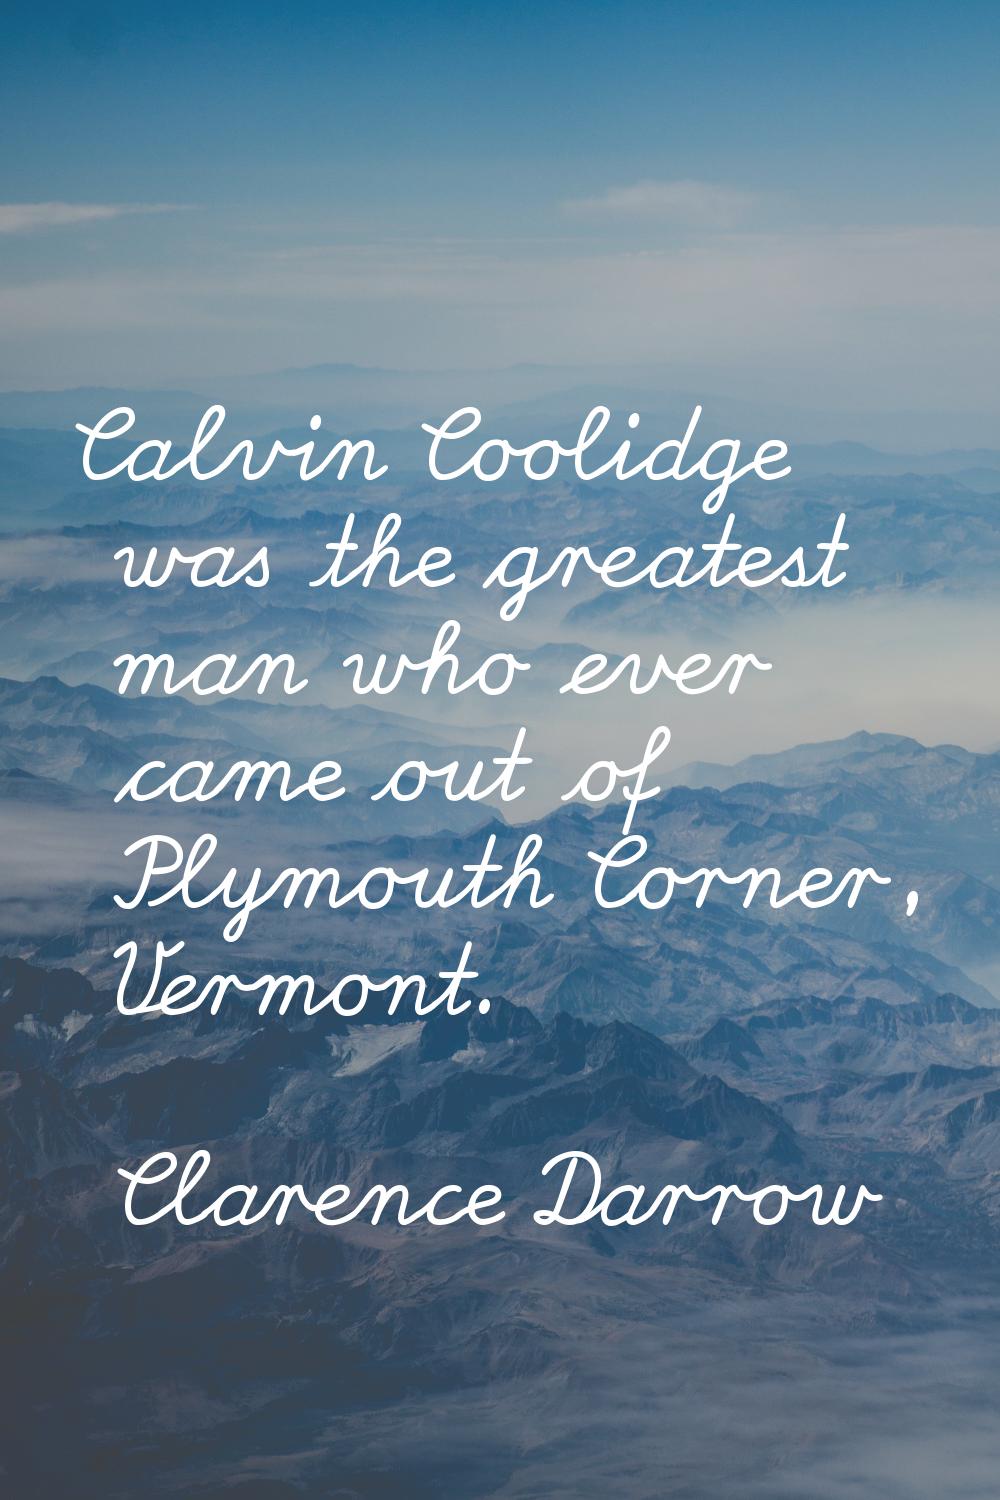 Calvin Coolidge was the greatest man who ever came out of Plymouth Corner, Vermont.